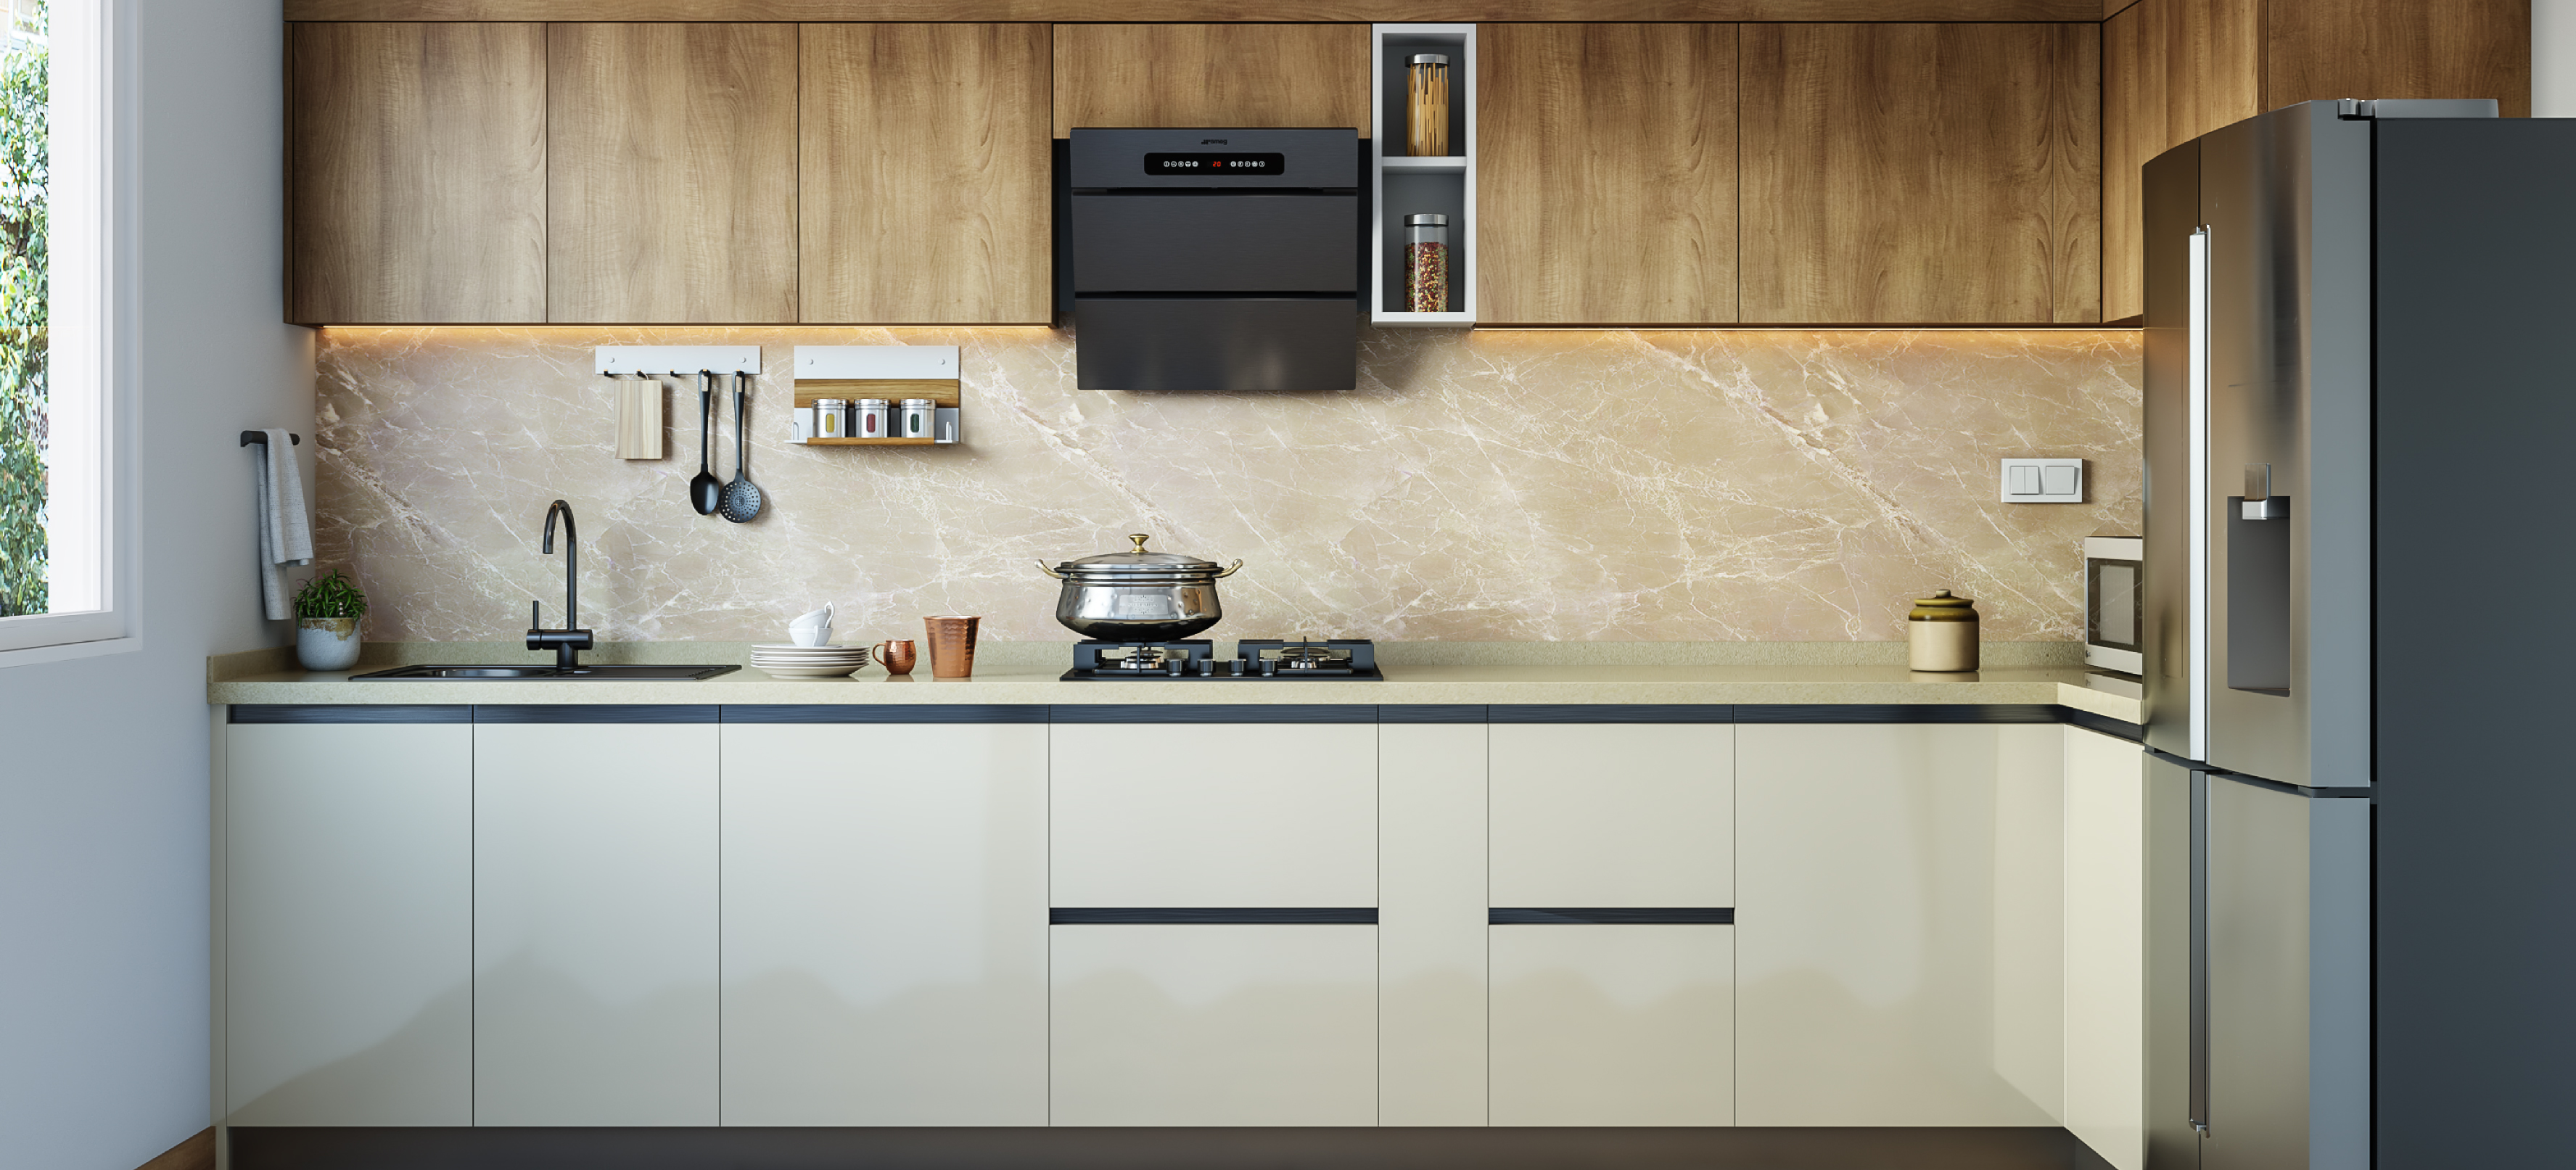 Modular Kitchen Sizes And Dimensions In India For Your Urban Ladder